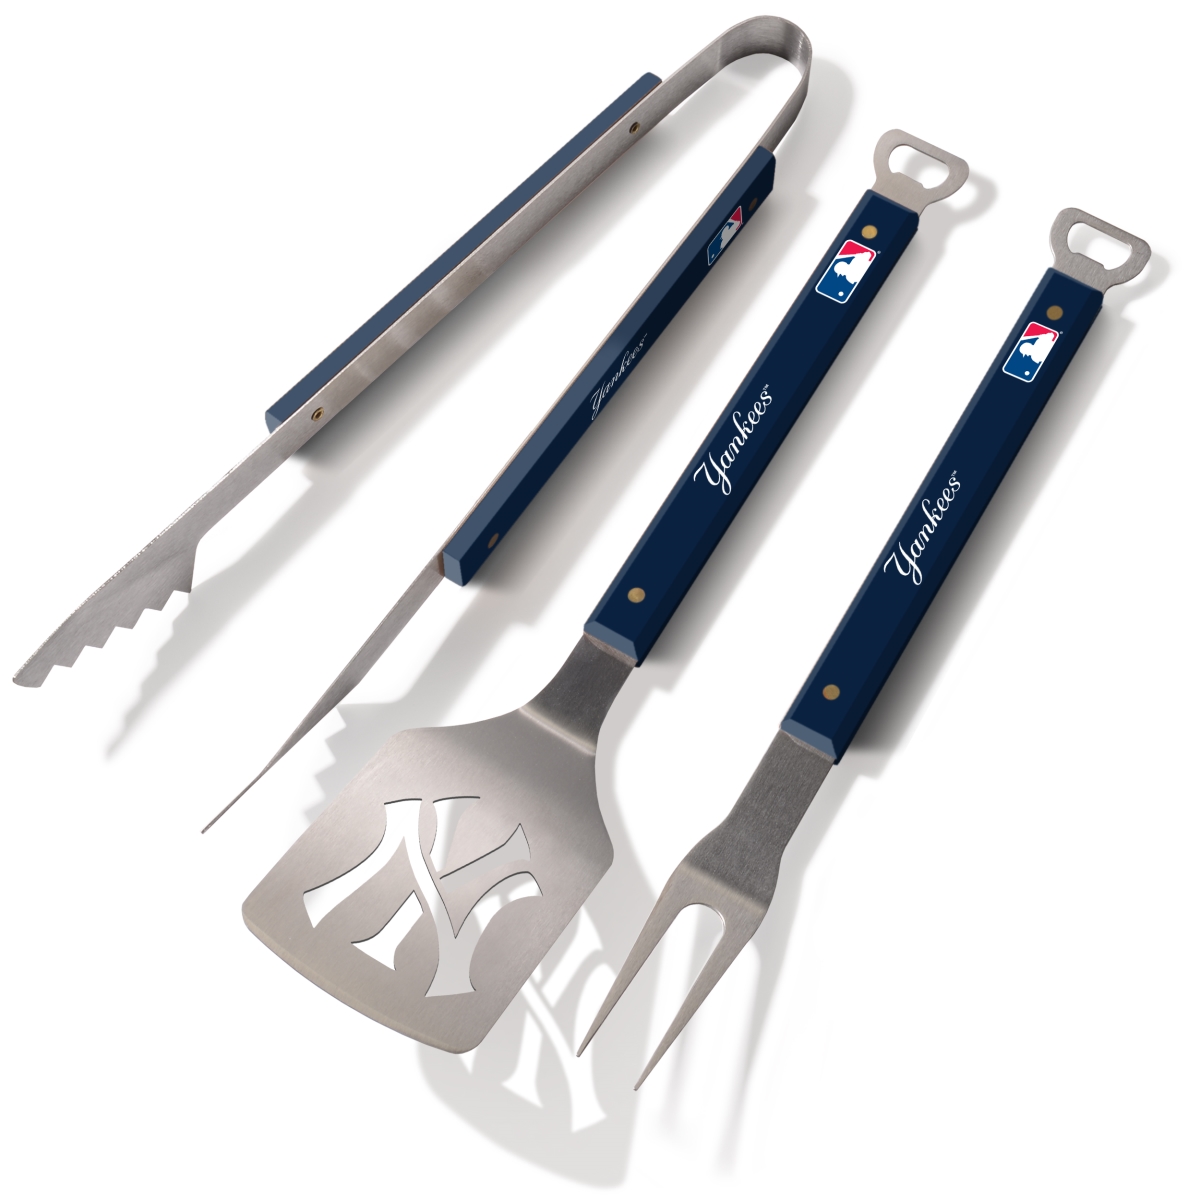 Picture of YouTheFan 5020339 New York Yankees Spirit Series 3 Piece BBQ Set